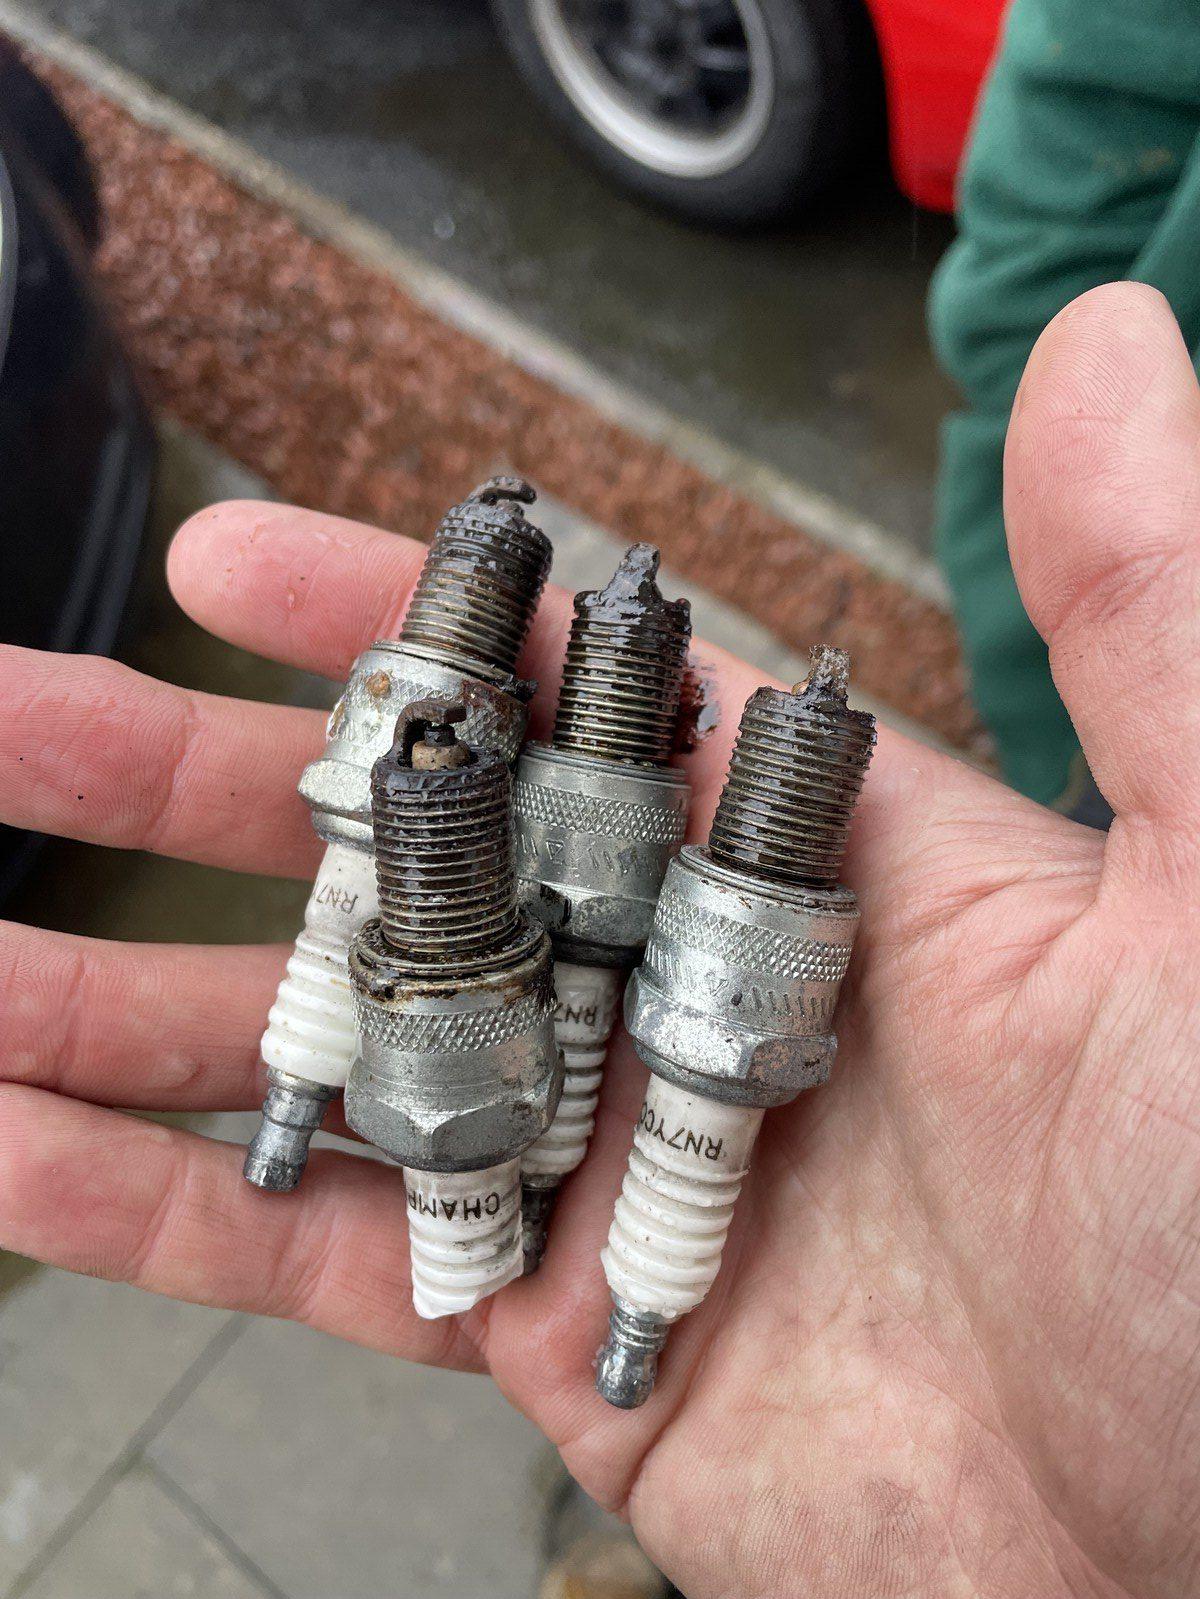 Holding a set of extremely gunky spark plugs, maybe with evidence that we'd flooded the engine at some point